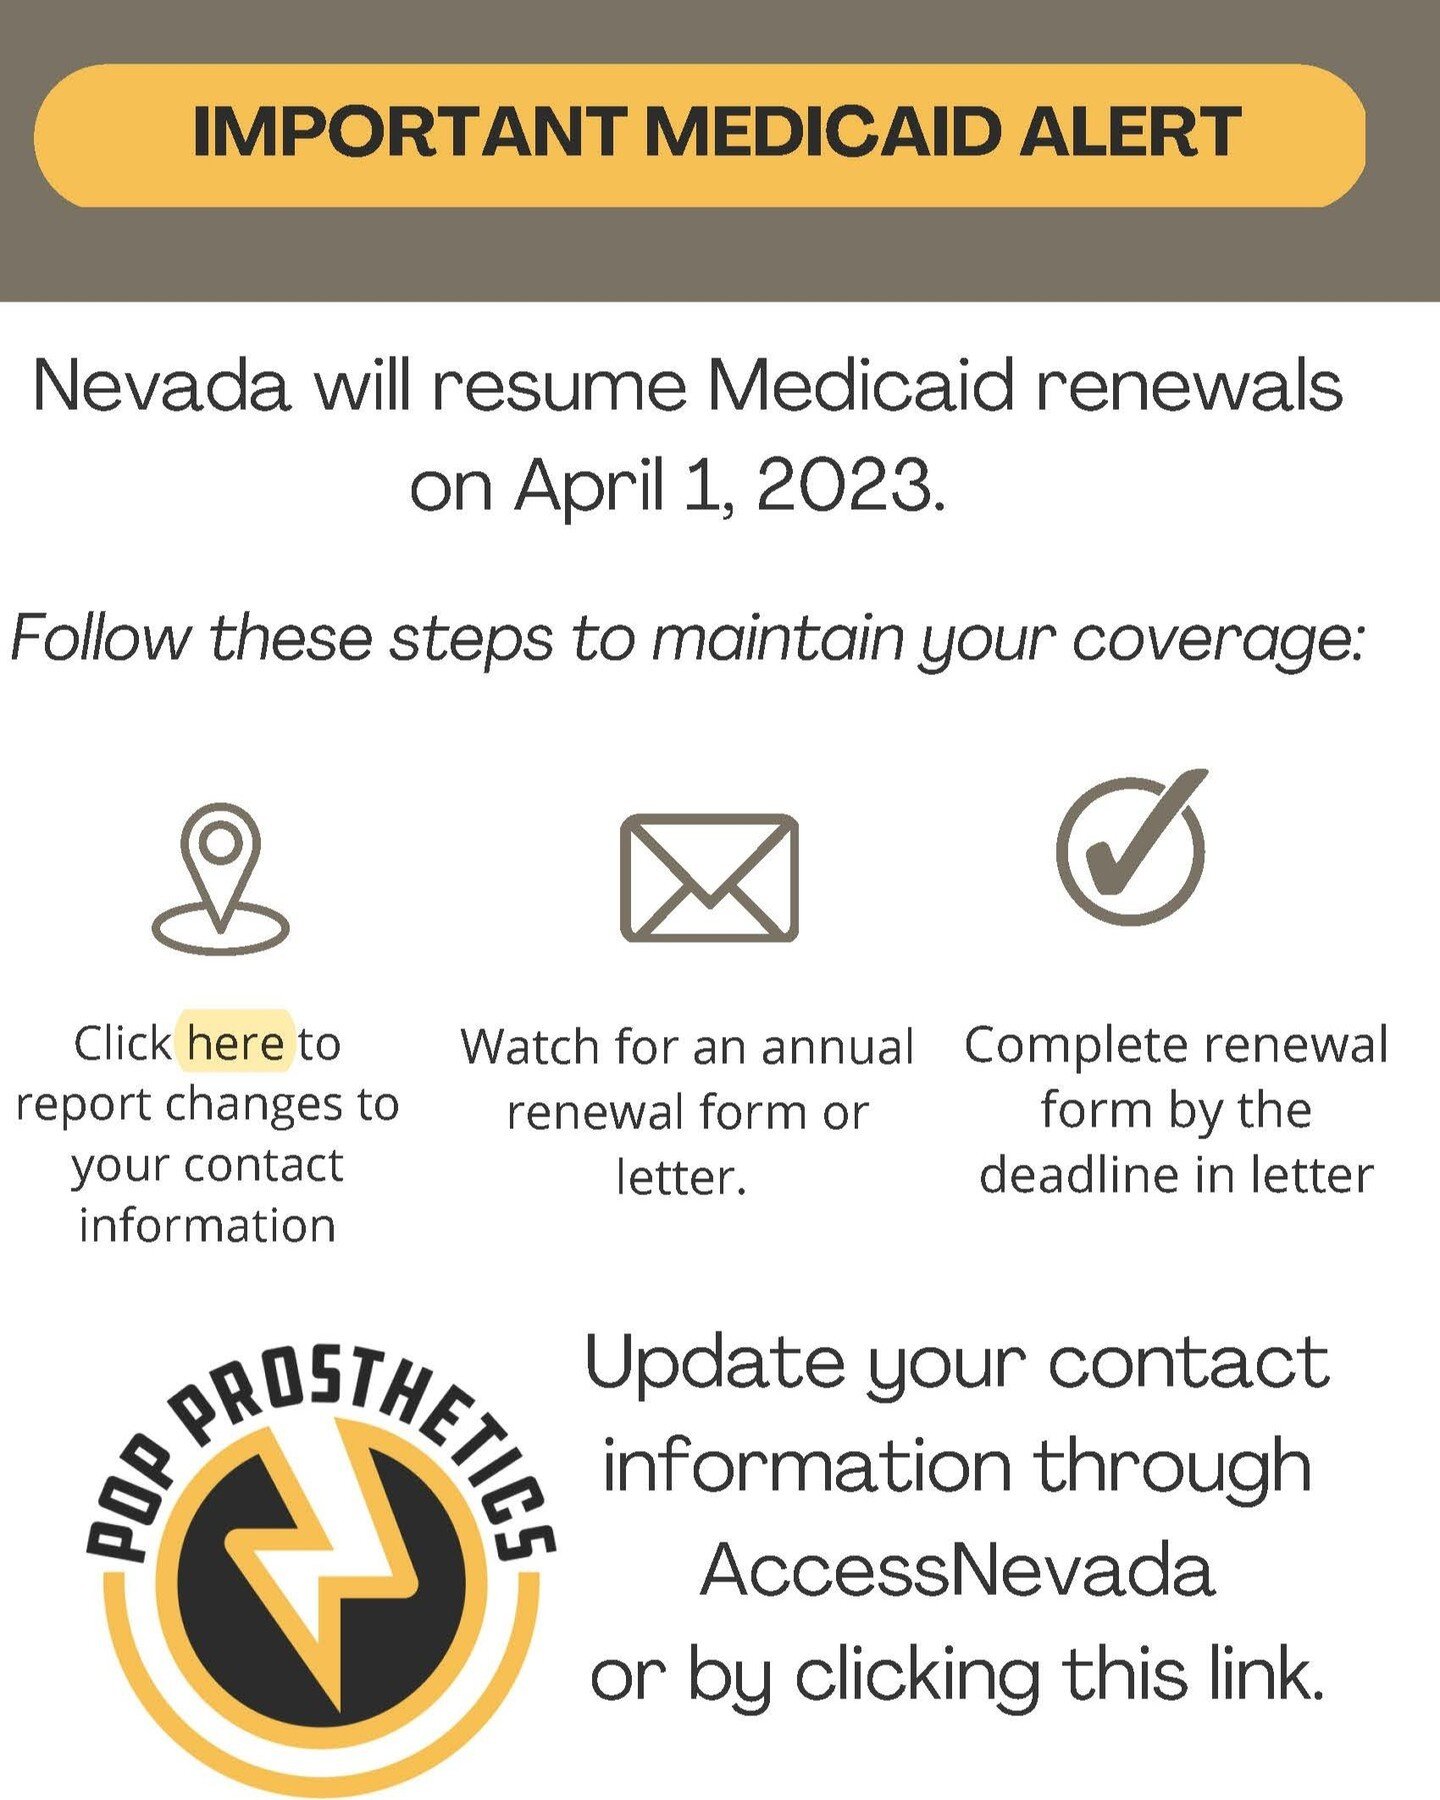 Medicaid annual renewals have resumed.  Be sure to update your contact information and respond to all correspondence to avoid lapses in coverage. (link in profile)⠀
⠀
https://bit.ly/3AK55ED